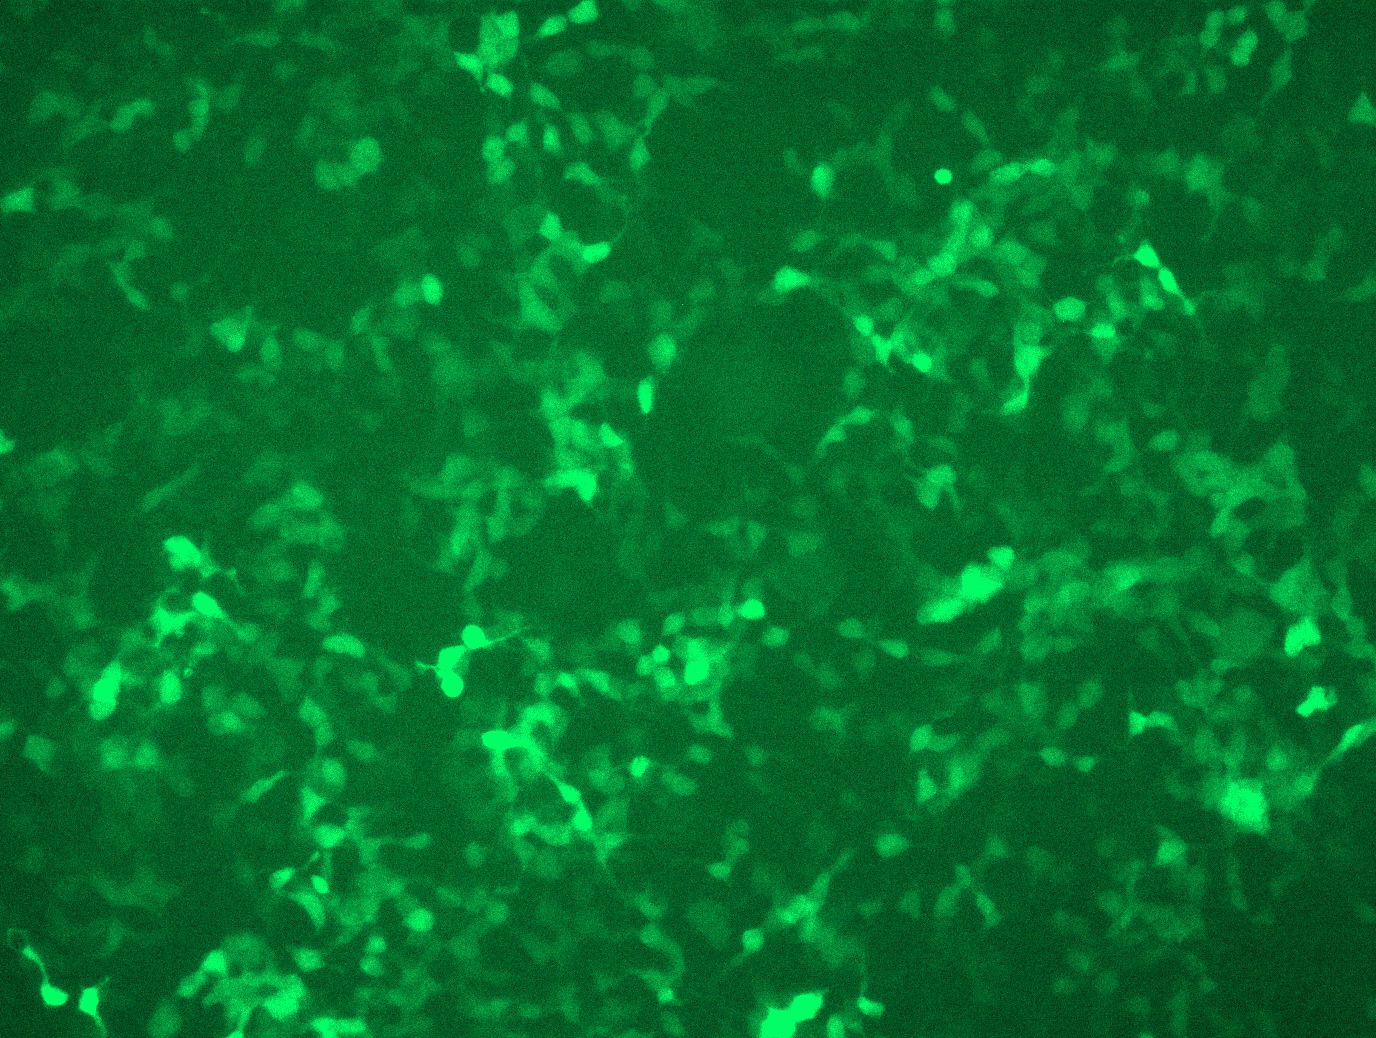 GFP signal was observed under microscope at 48 hours after transduction of TL309947A virus into HEK293 cells. TL309947A virus was prepared using lenti-shRNA TL309947A and TR30037 packaging kit.